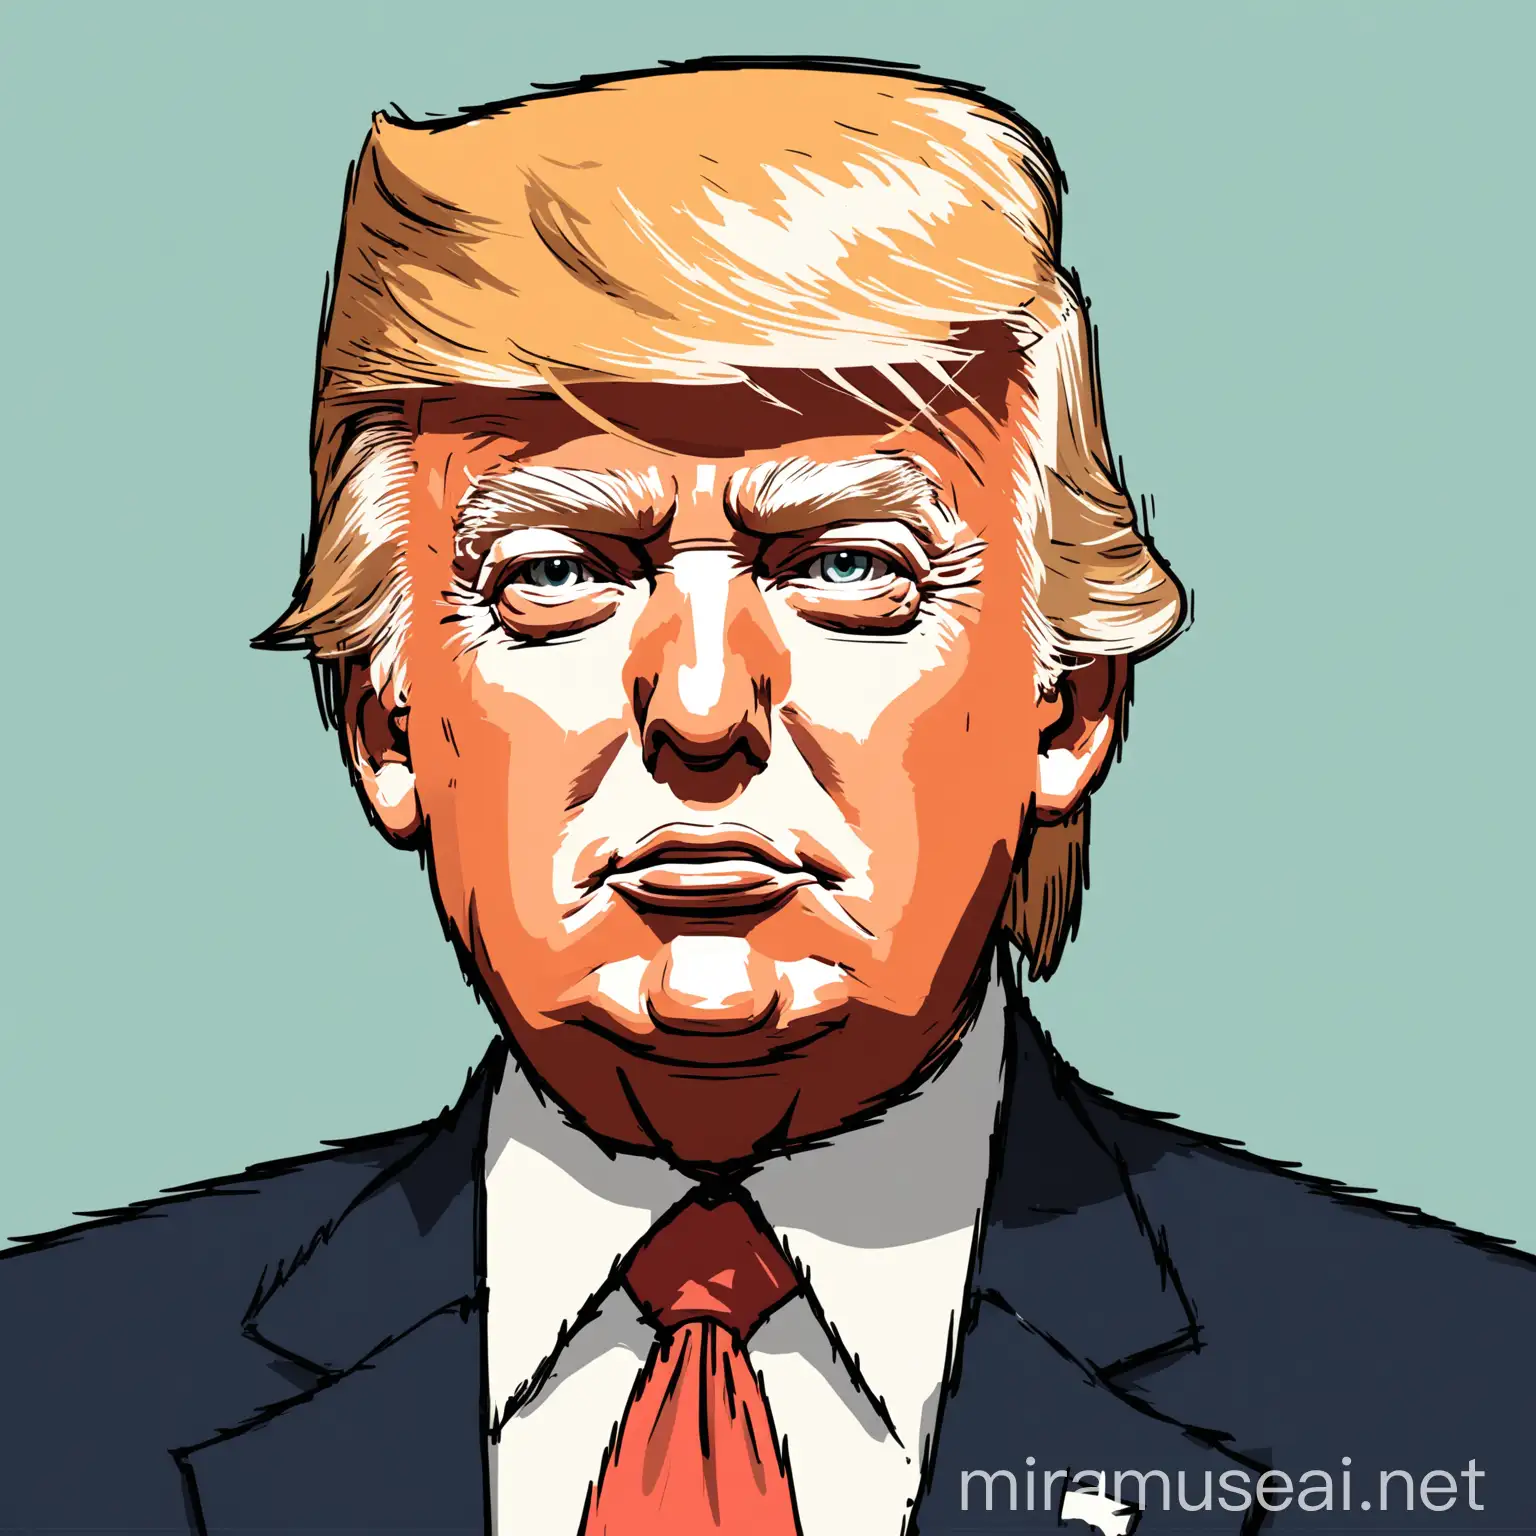 Illustration of Donald Trump with American Flag Background